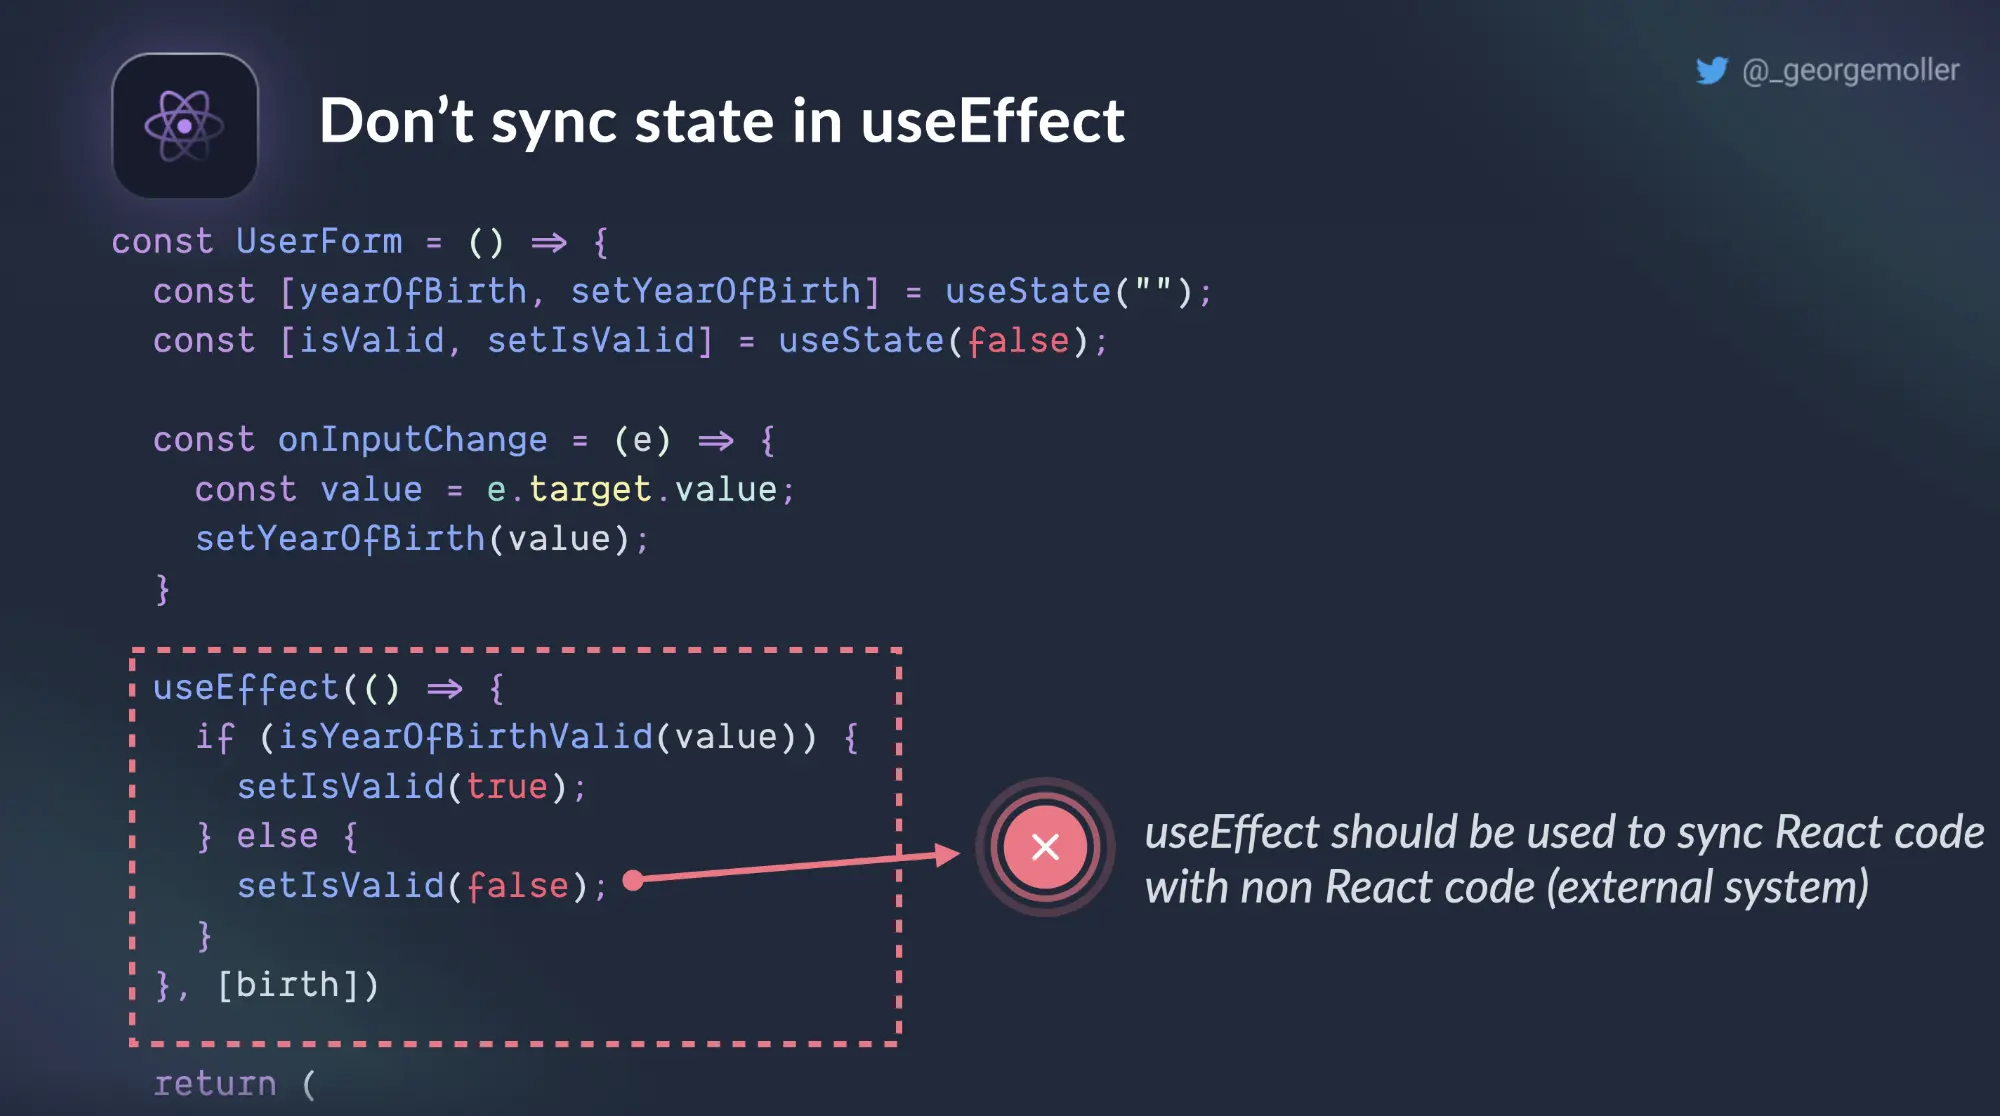 Don't sync state in useEffect